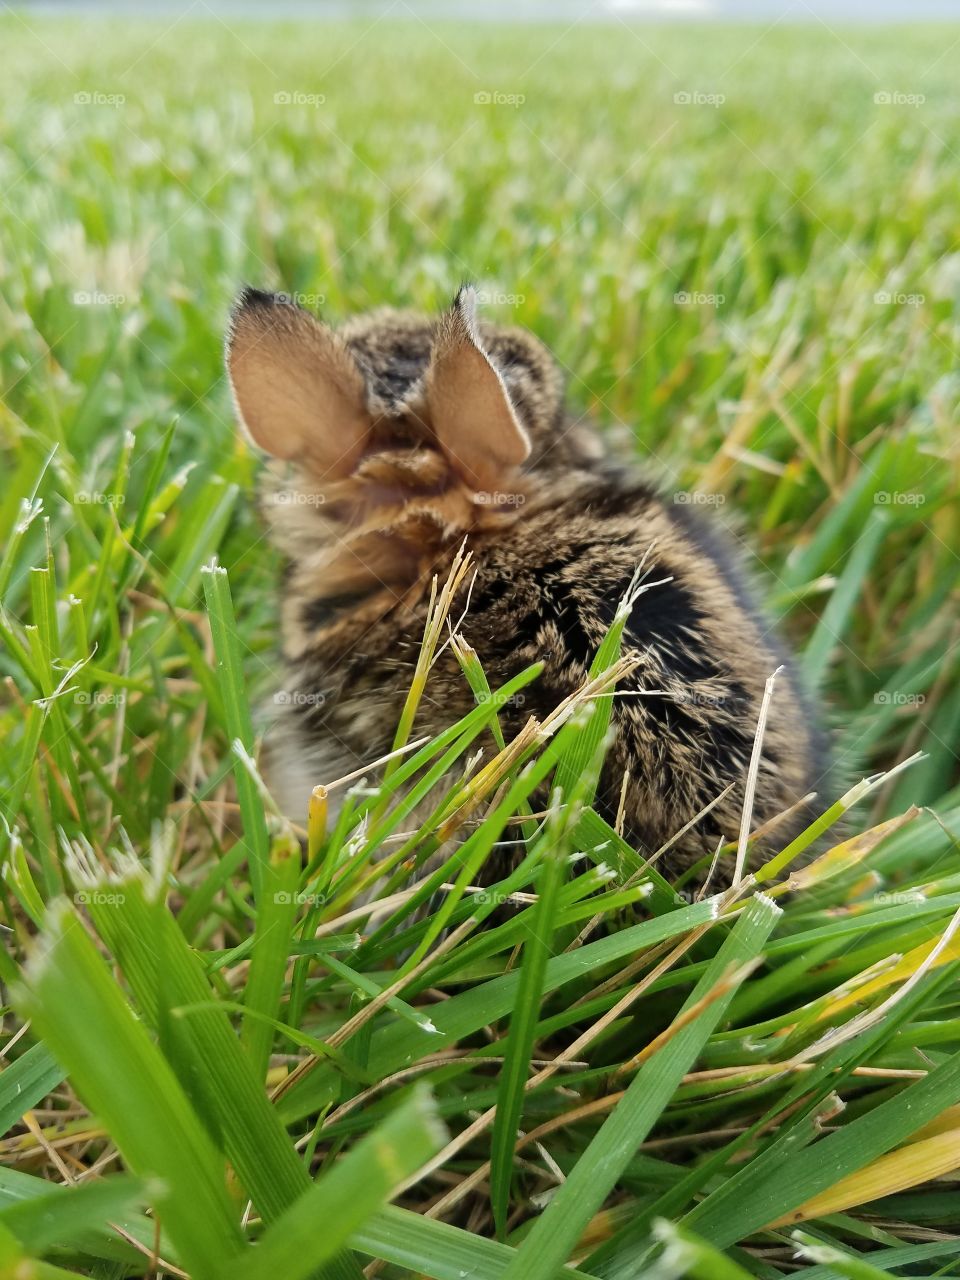 cute baby bunny in grass looking away